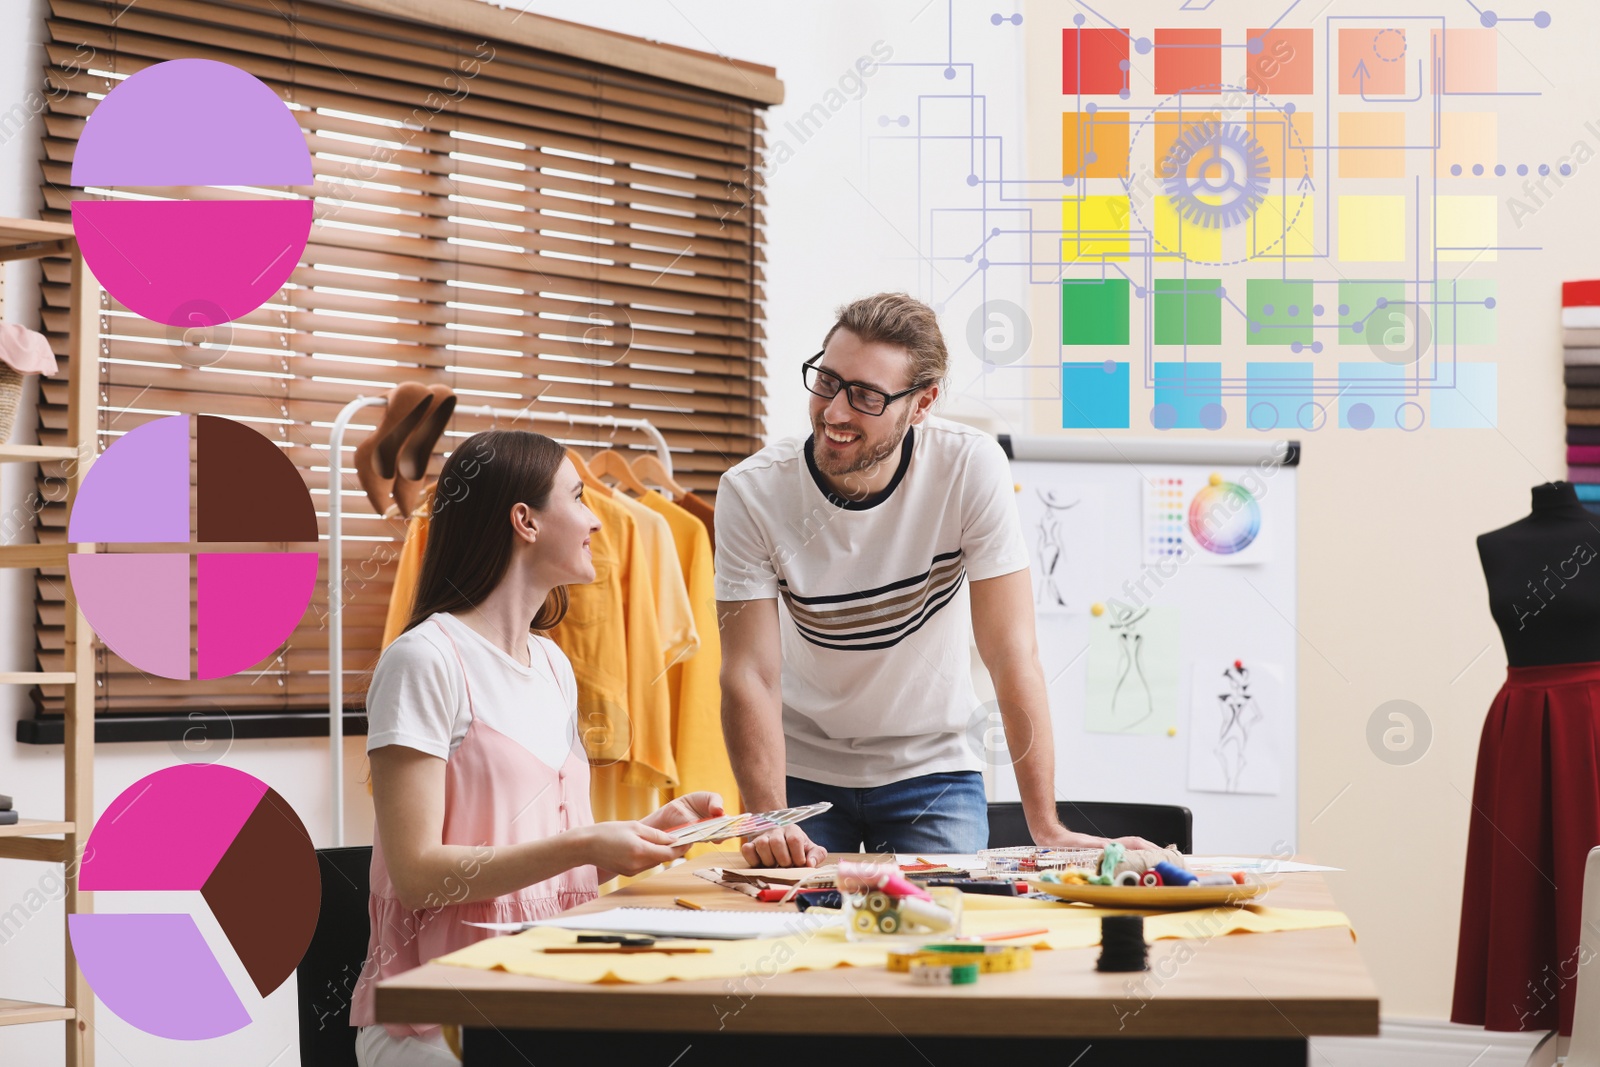 Image of Fashion designers creating new clothes in studio and illustration of colorful graphs